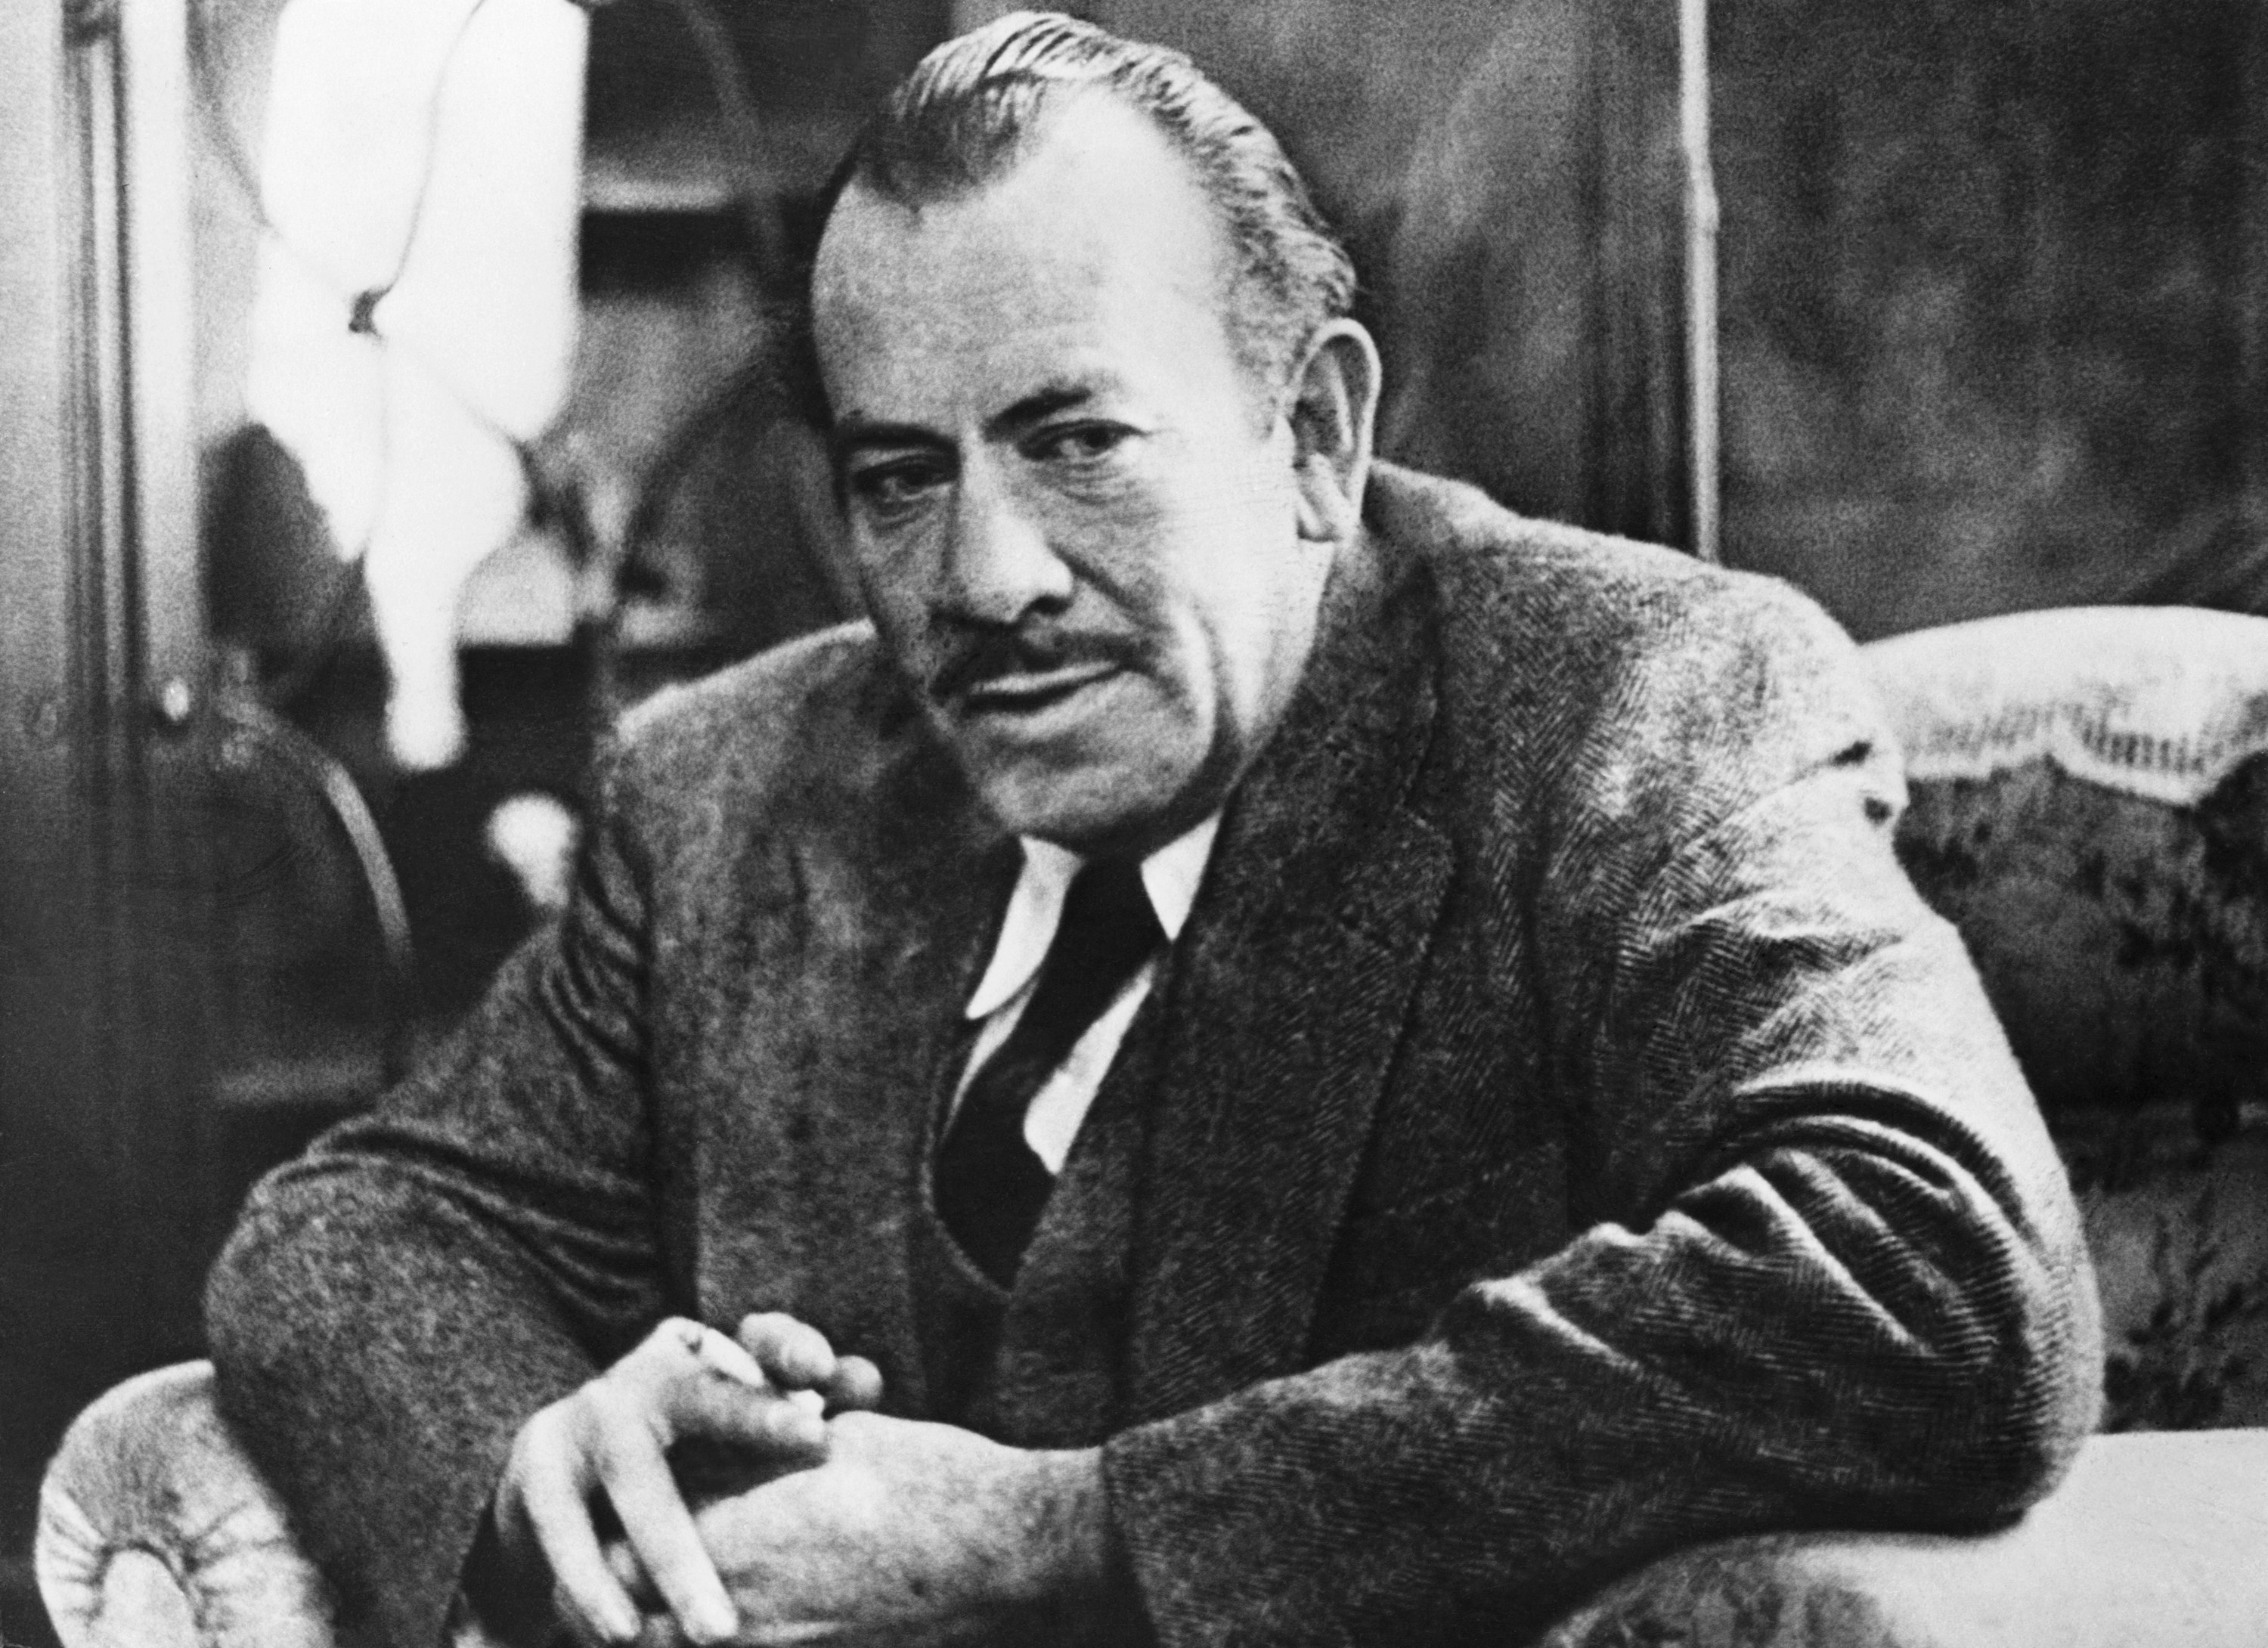 John Steinbeck sitting with his hands together